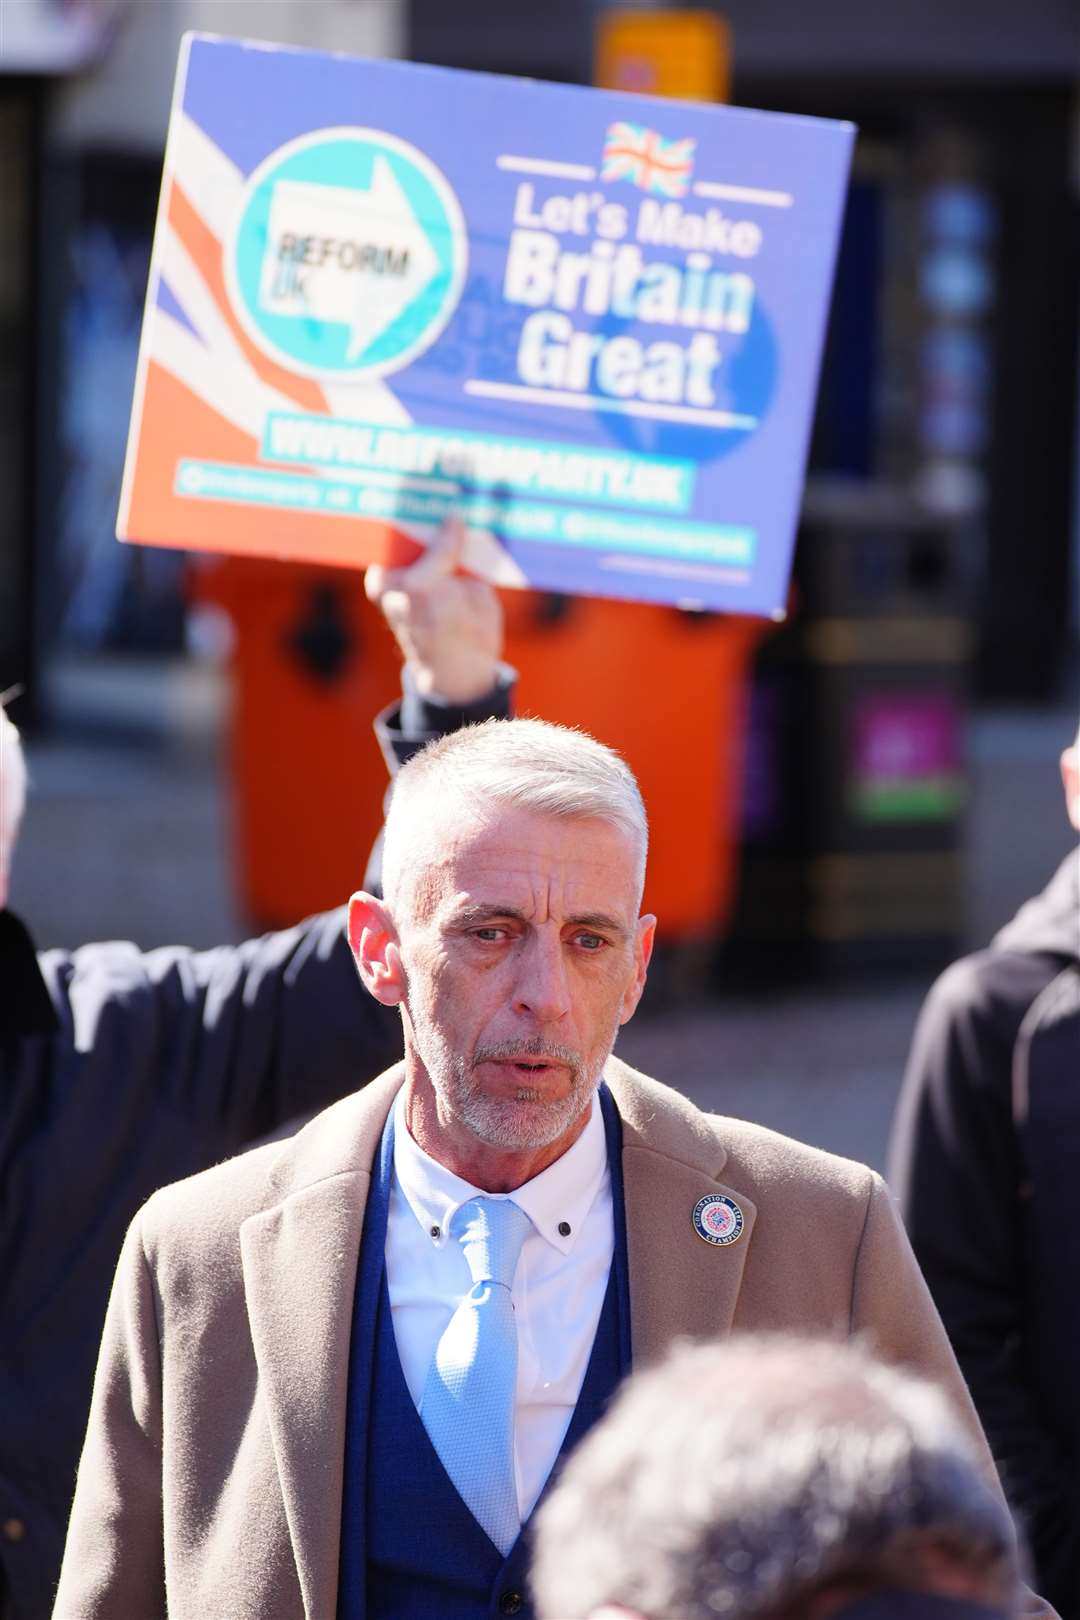 Mark Butcher, the newly announced Reform UK candidate for the forthcoming Blackpool South by-election, in Blackpool during a campaign event (Peter Byrne/PA)